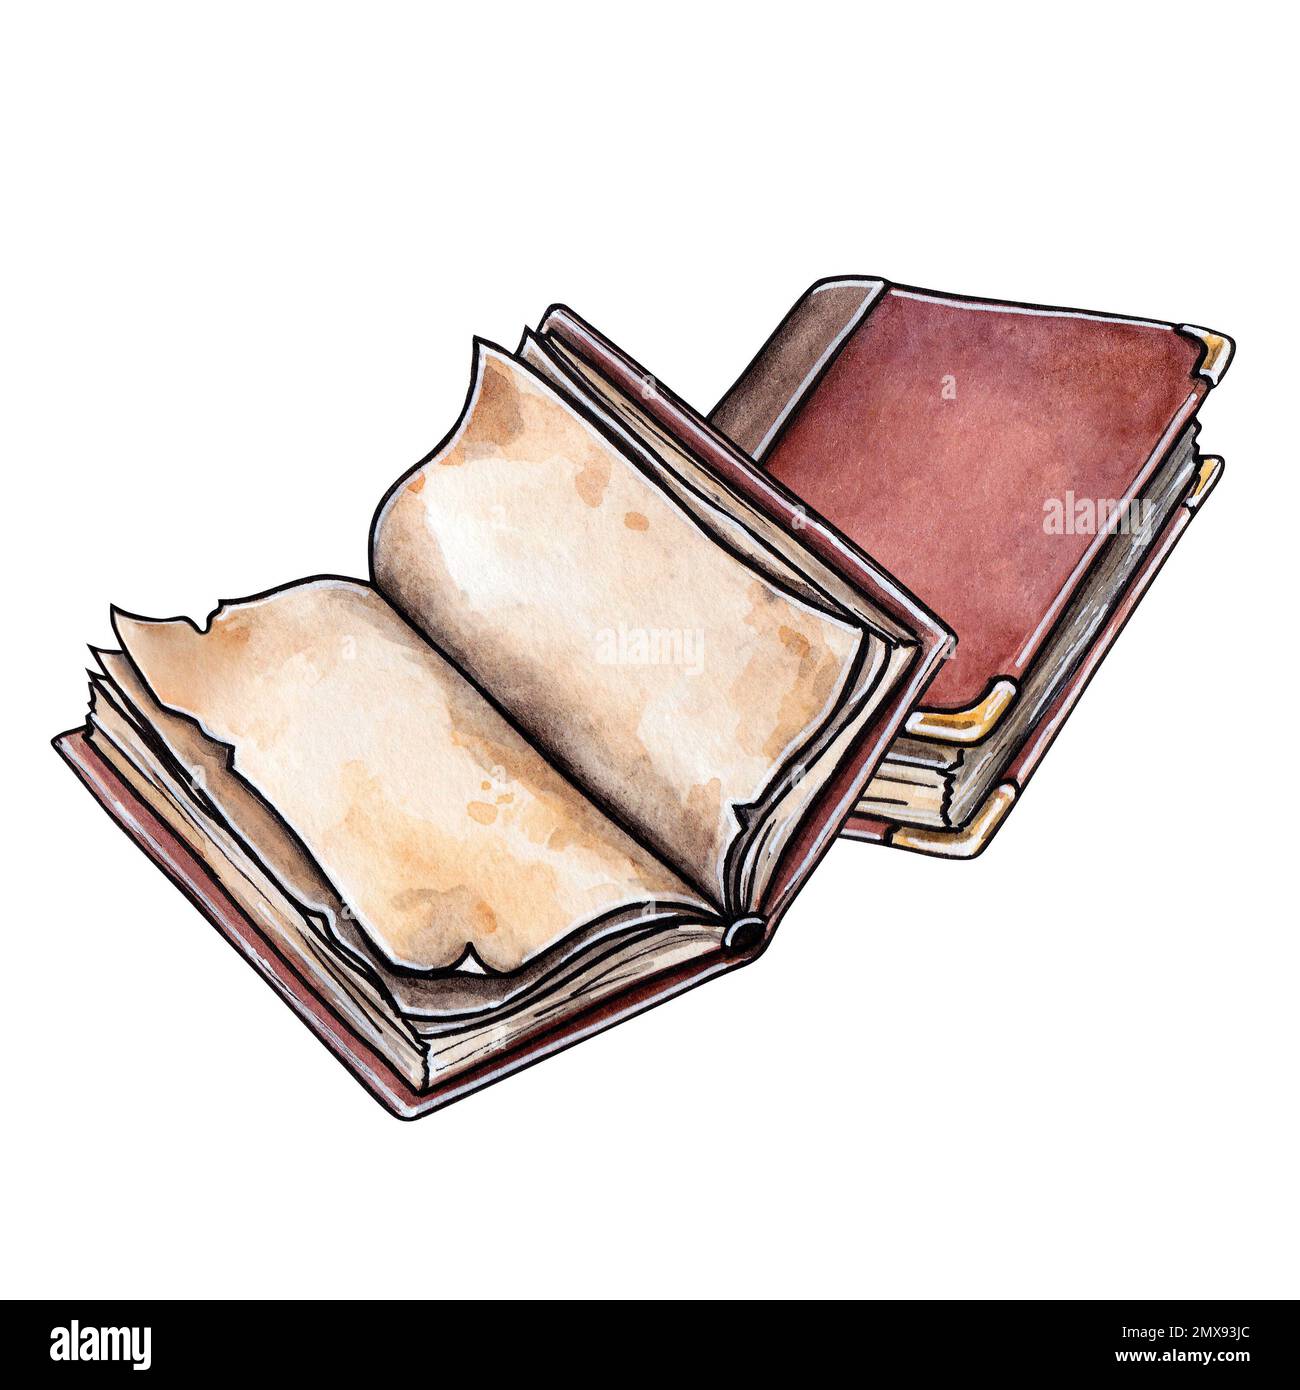 Old Books Watercolor Hand Drawn Illustration Isolated On White Background  Stock Illustration - Download Image Now - iStock